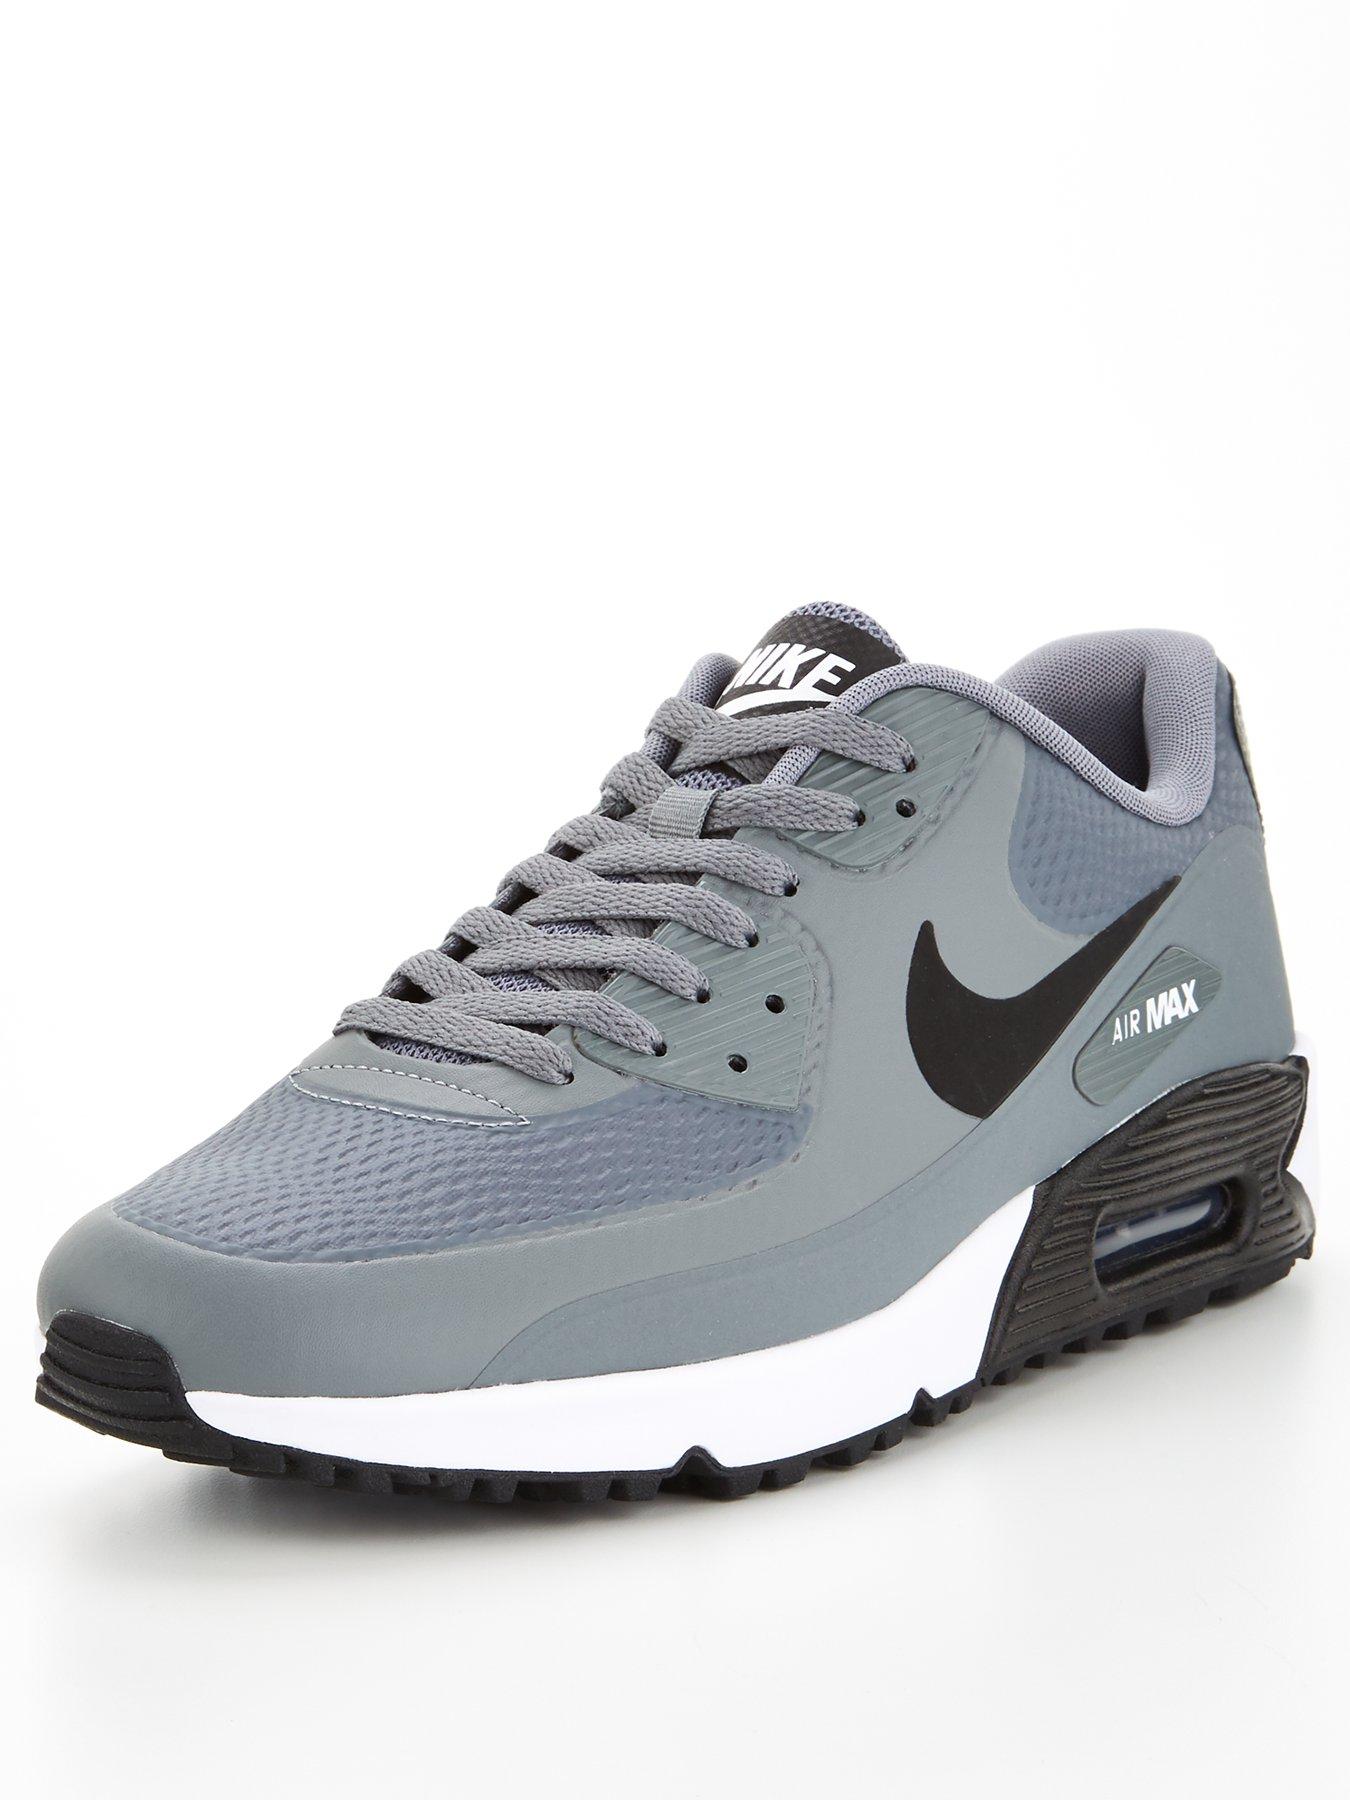 air max trainers for sale uk